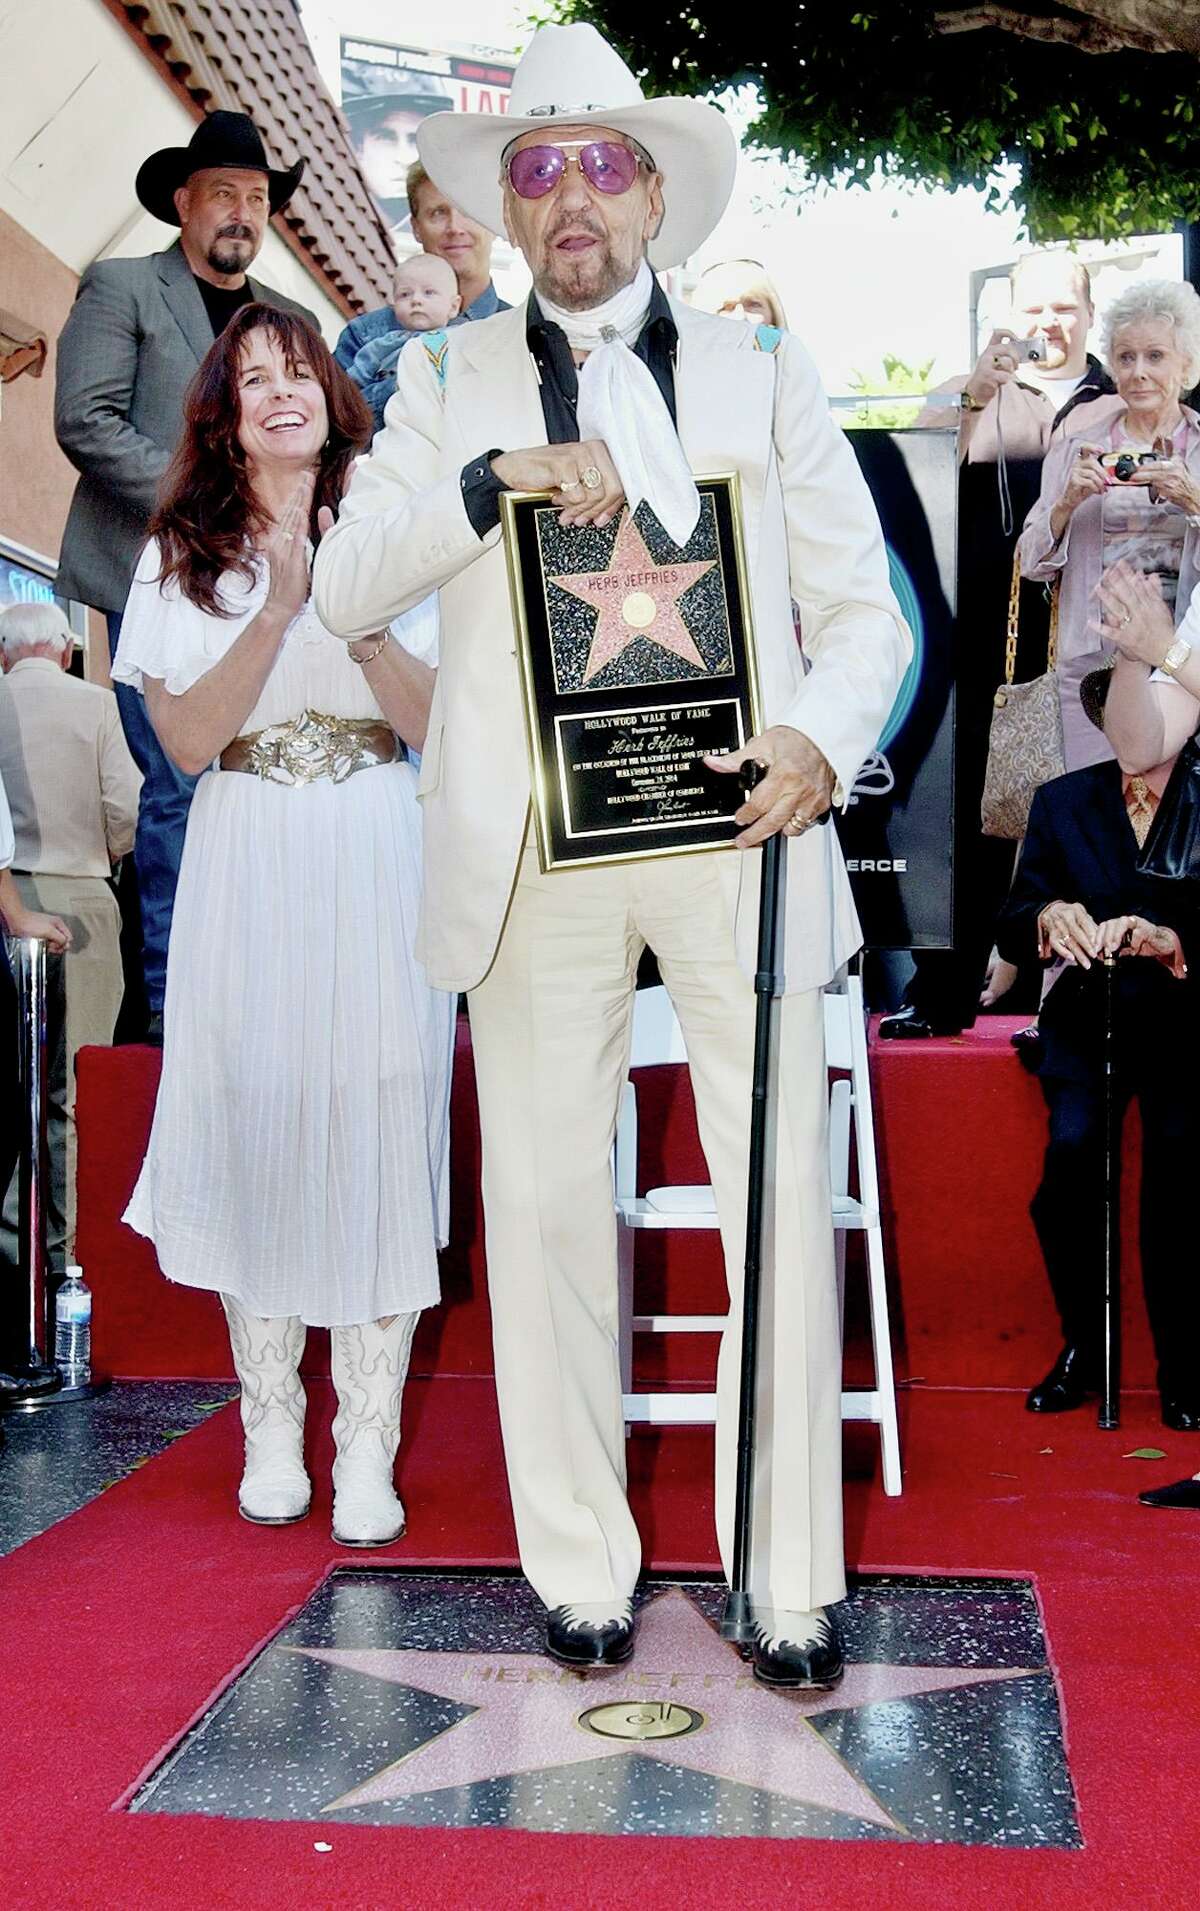 Herb Jeffries, a singing cowboy hero of the silver screen, along with his wife Savannah, left, takes the first step on his new star along the Walk of Fame in the Hollywood section of Los Angeles, following dedication ceremonies on his 93rd birthday, Friday, Sept. 24, 2004. Jeffries was known as the "Bronze Buckaroo," the hero of a string of all-black musical Westerns in the 1930s, and also was an original member of the Duke Ellington Orchestra and the singer on the band's hit songs "Flamingo" and "Satin Doll" from the 1940s on. (AP Photo/Reed Saxon)